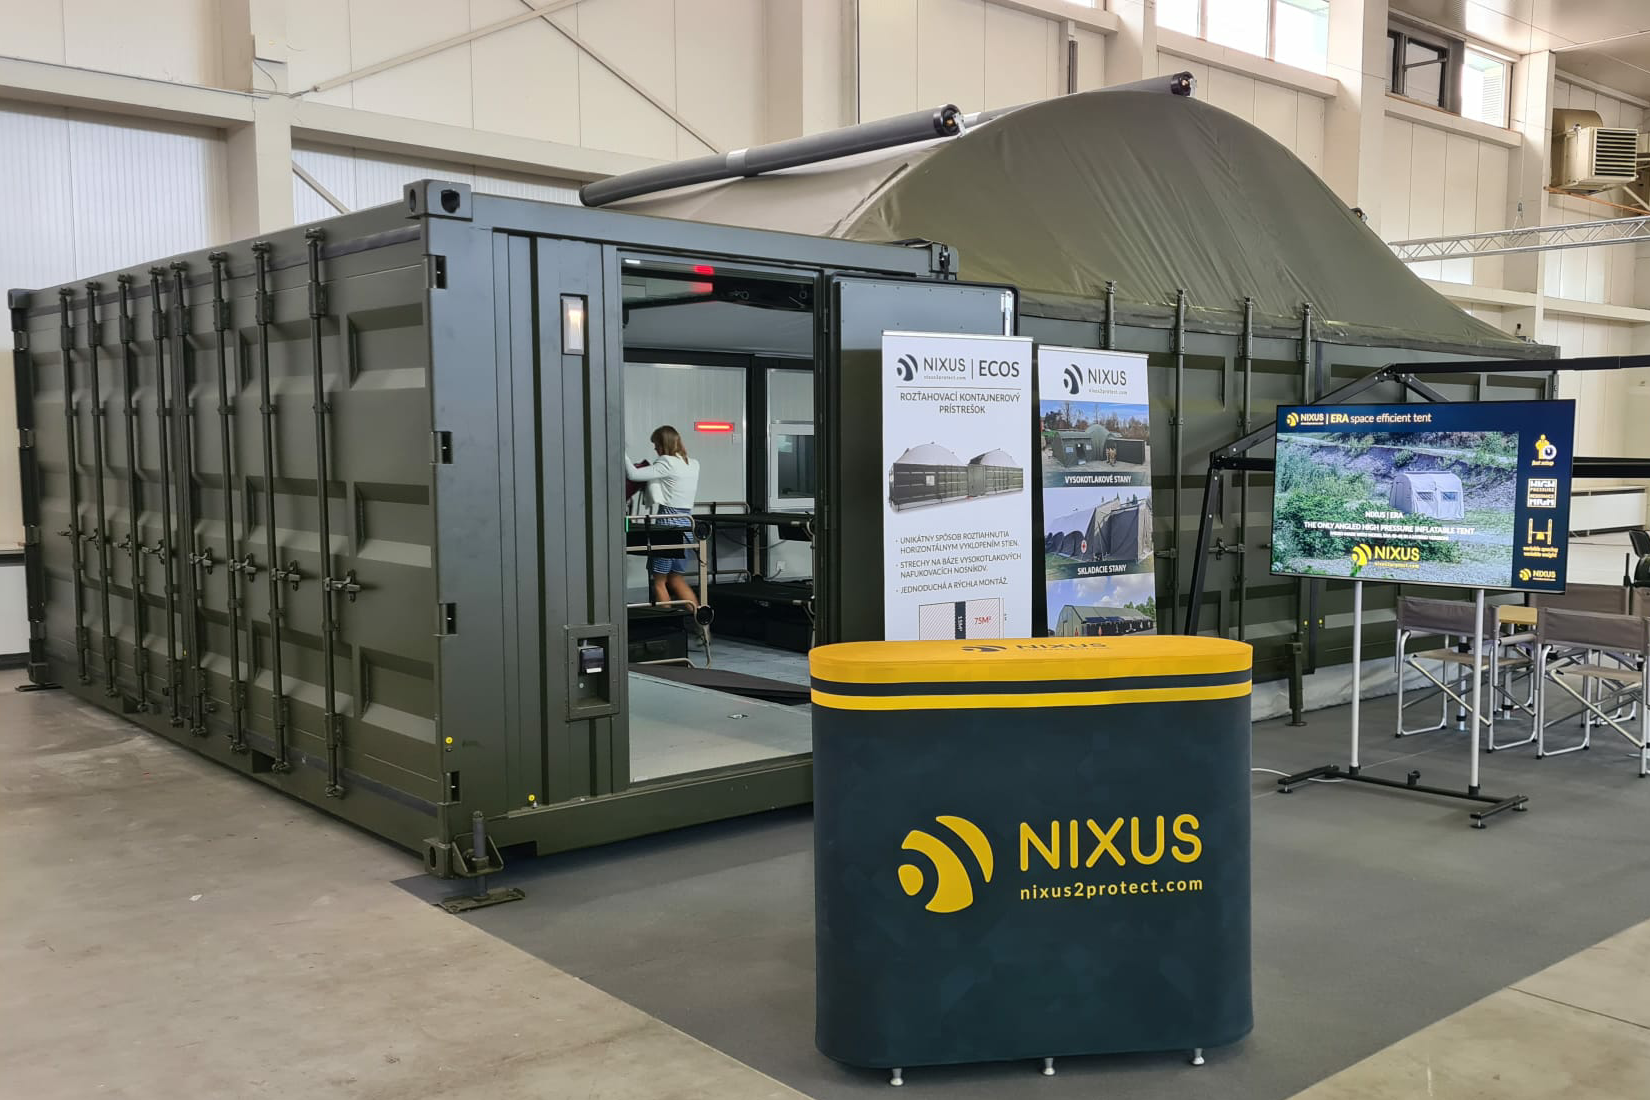 NIXUS ECOS -Expandable container shelter for defence/military, humanitarian, medical, search & rescue and industrial applications